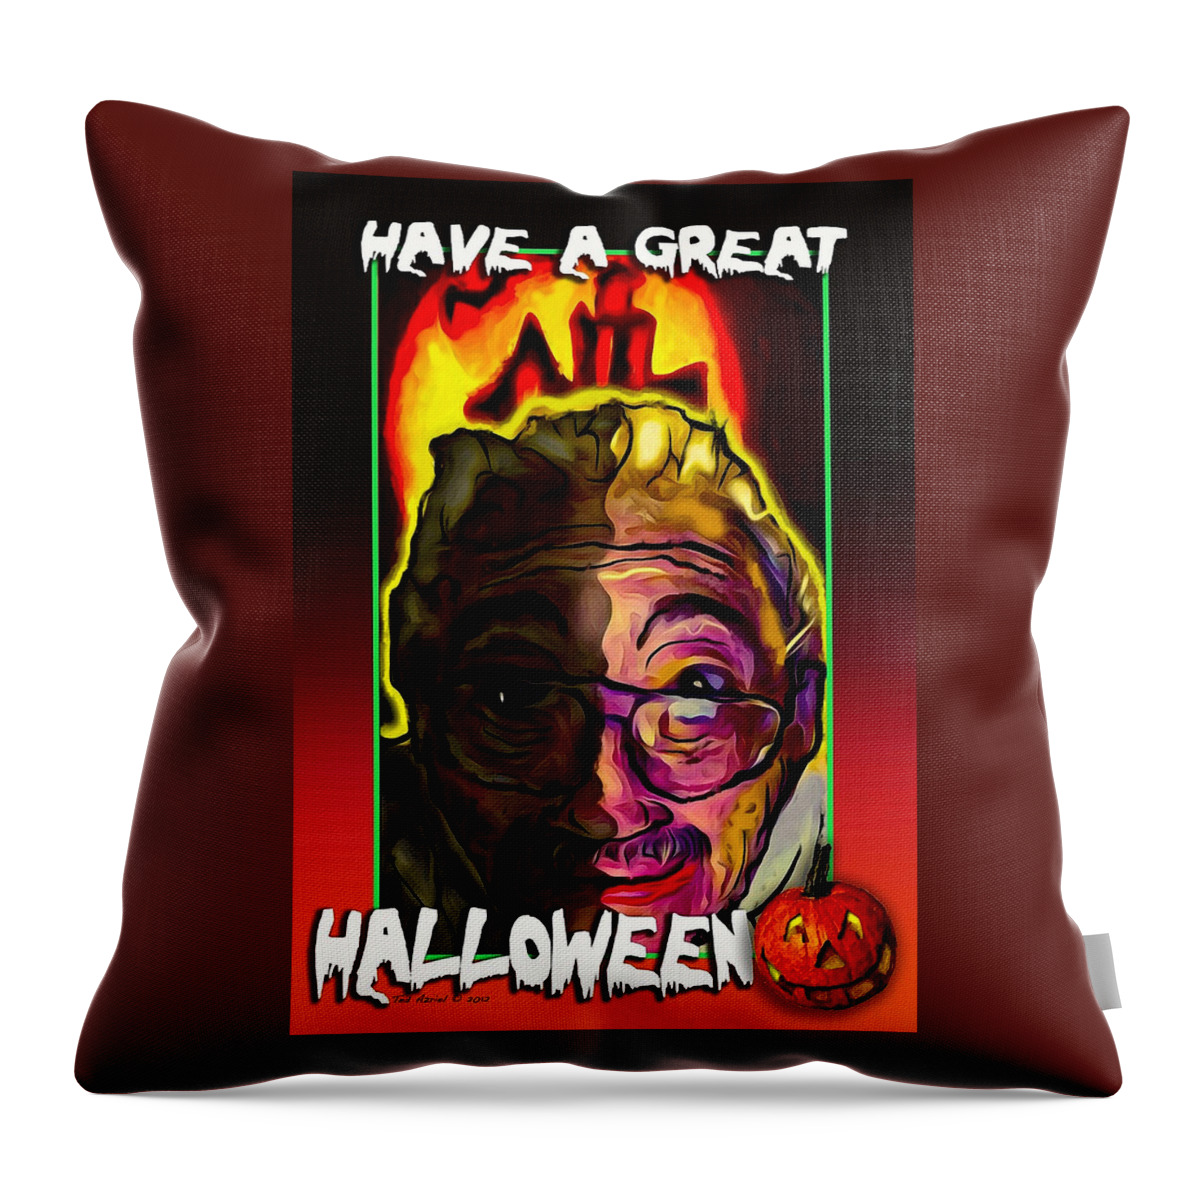 Paintings Throw Pillow featuring the painting Have A Great Halloween by Ted Azriel